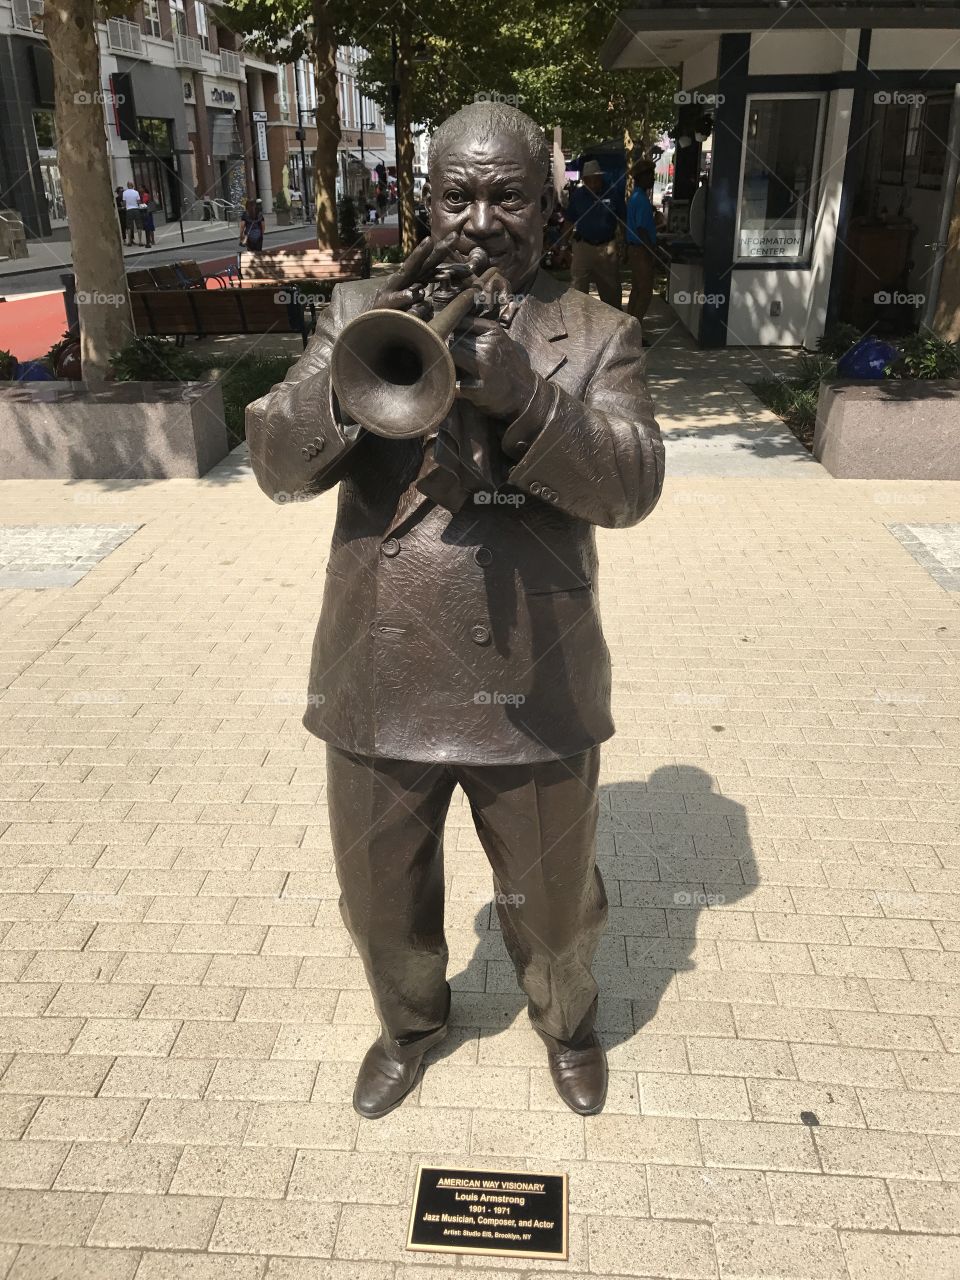 Louis Armstrong at his best